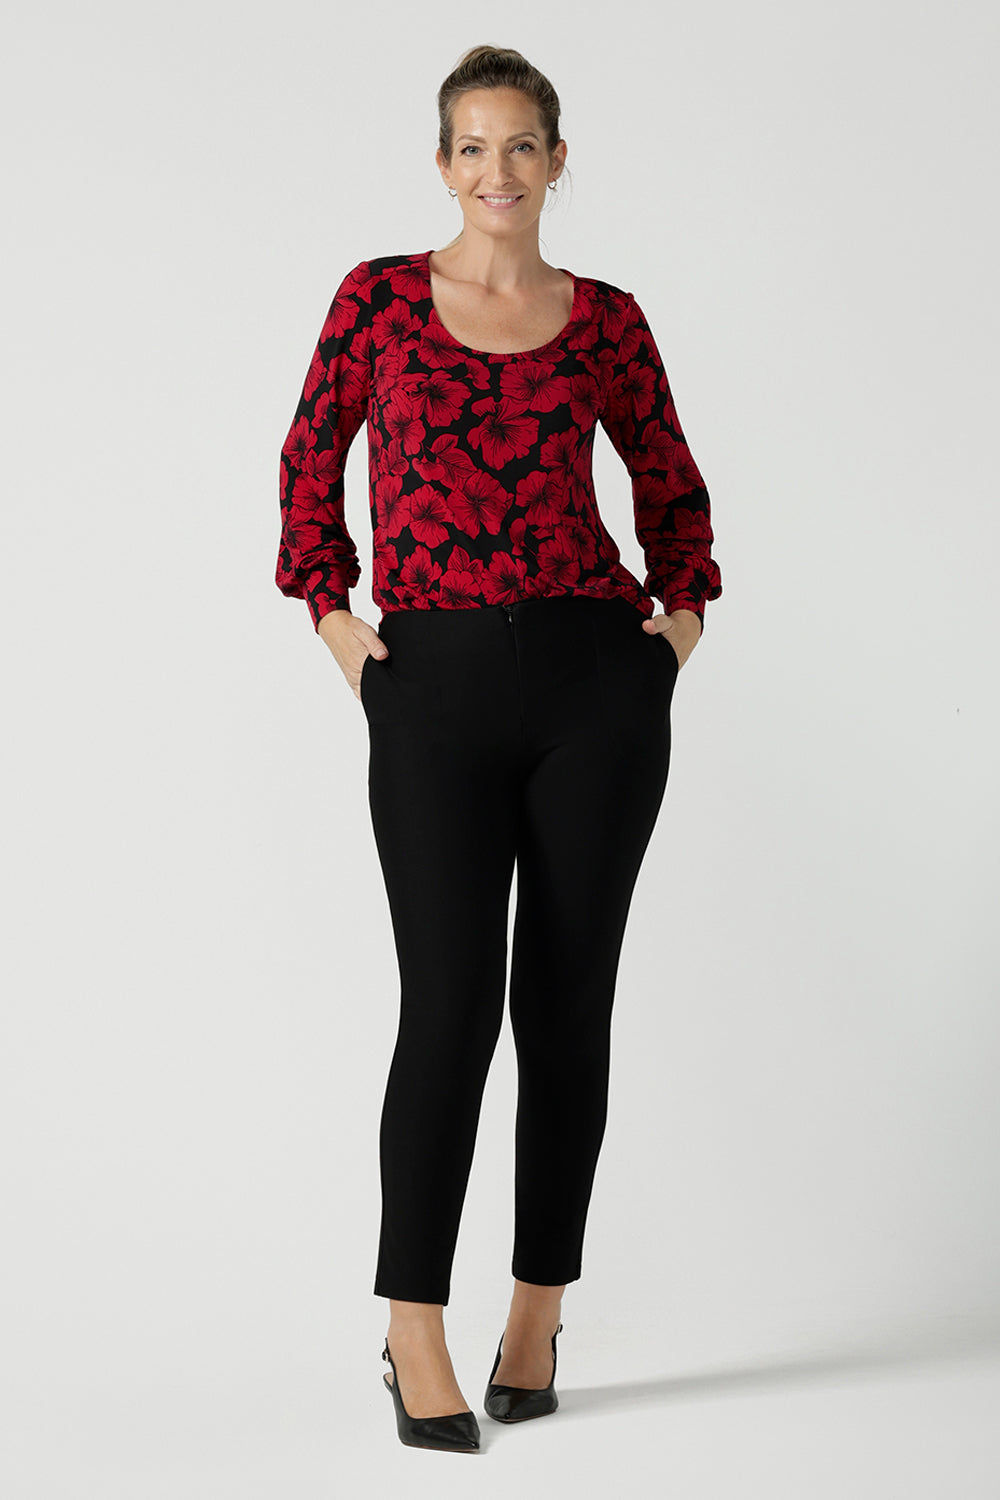 Size 10 woman wears the scoop neck bold poppy top with balloon sleeves. Curved hemline and cuffed sleeves. Made in Australia for women size 8 - 24. Styled back with the Brooklyn pant in black a skinny leg comfortable corporate work pant. 